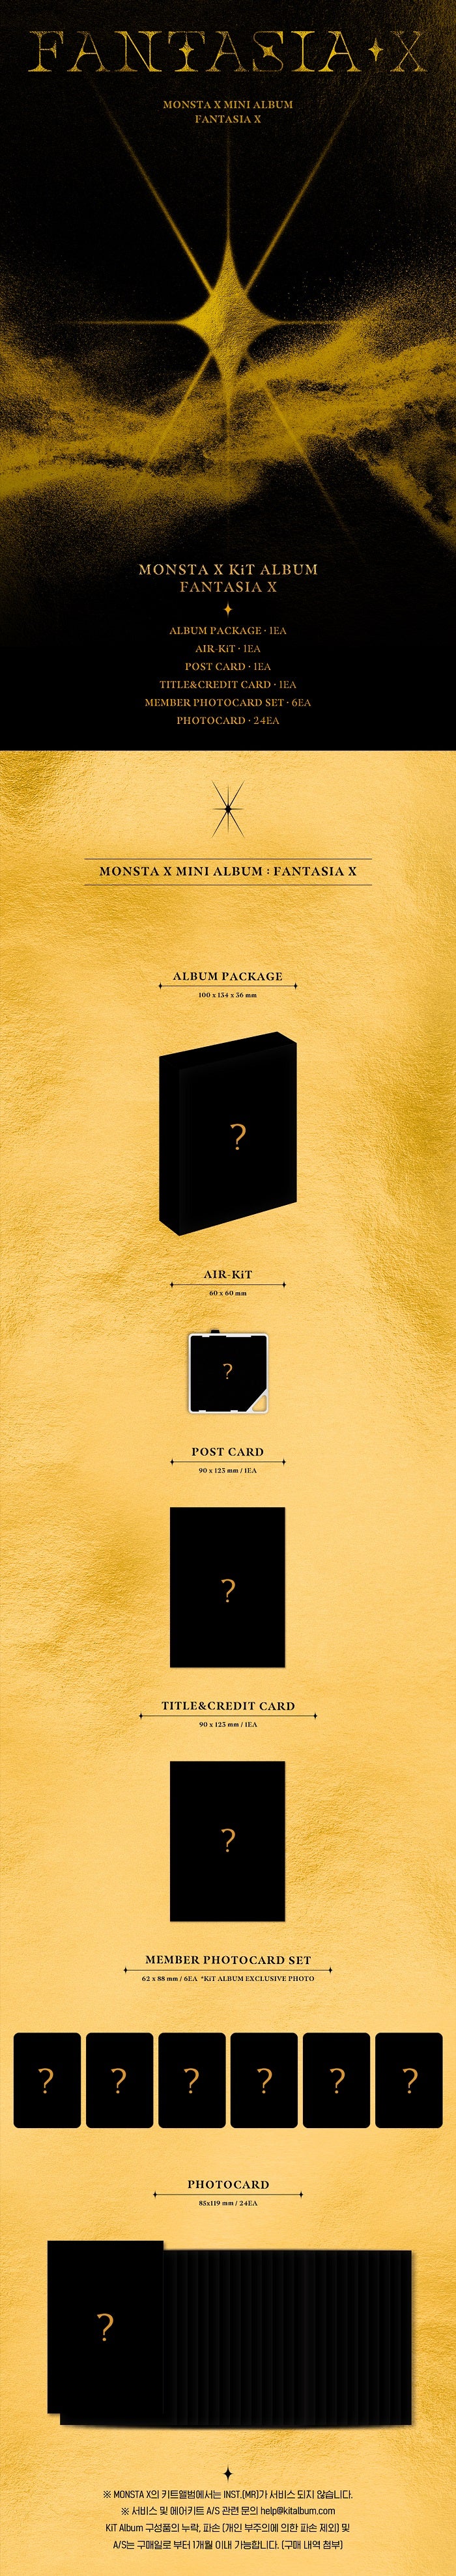 1 Air-kit
1 Post Card
1 Title & Credit Card
6 Member Photo Cards
24 Photo Cards